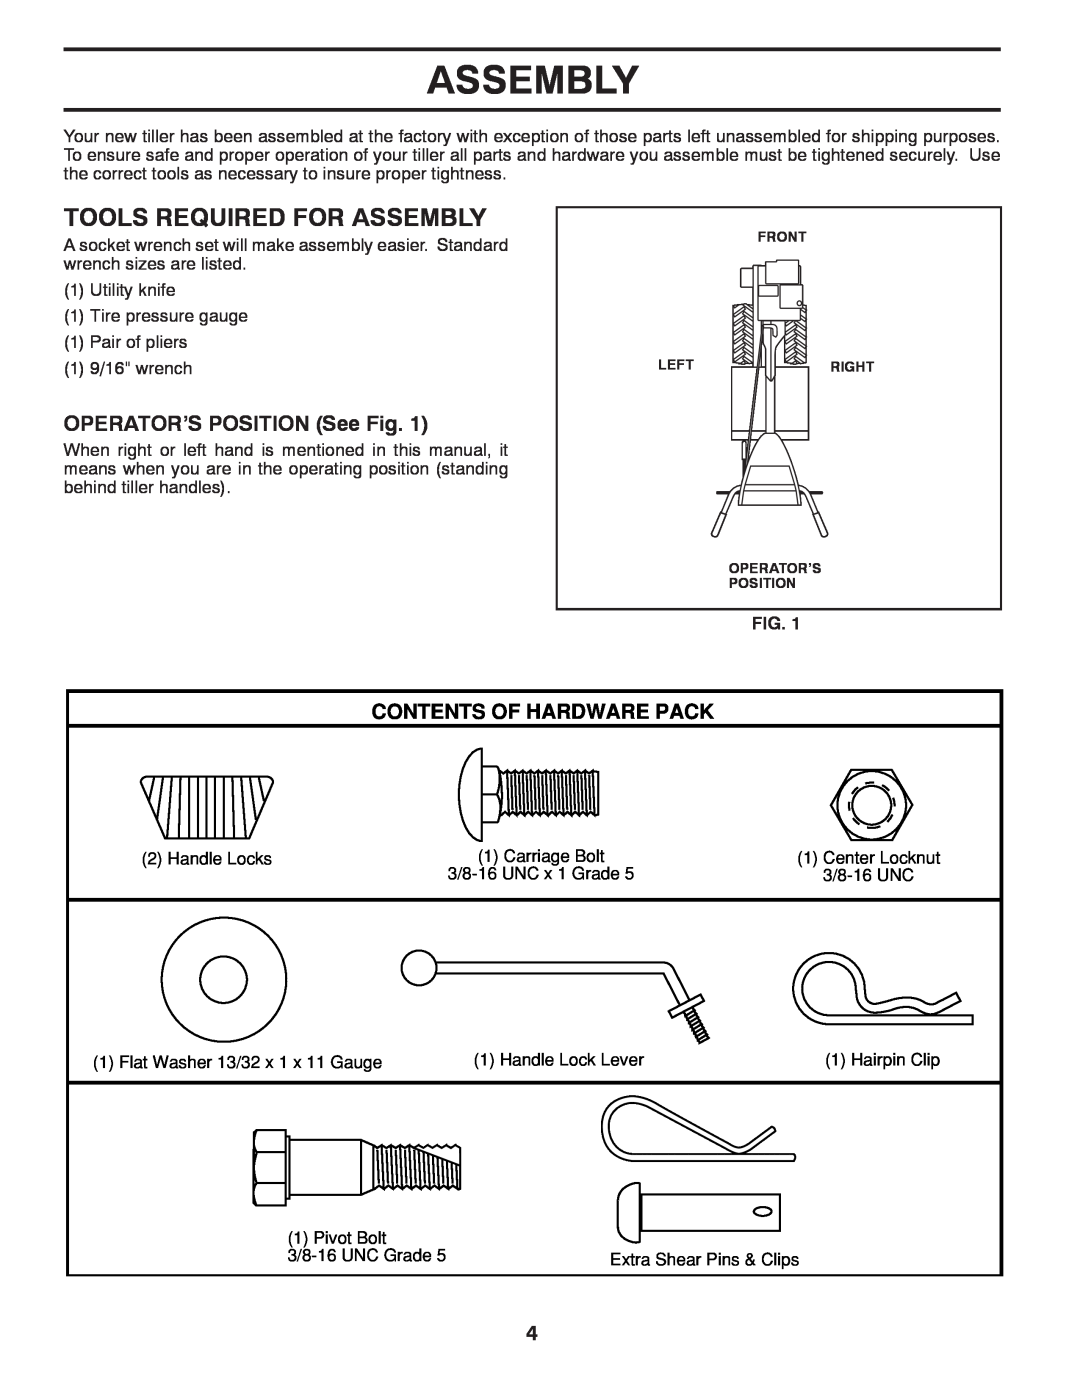 Poulan PRRT875X manual Tools Required For Assembly, OPERATOR’S POSITION See Fig, Contents Of Hardware Pack 